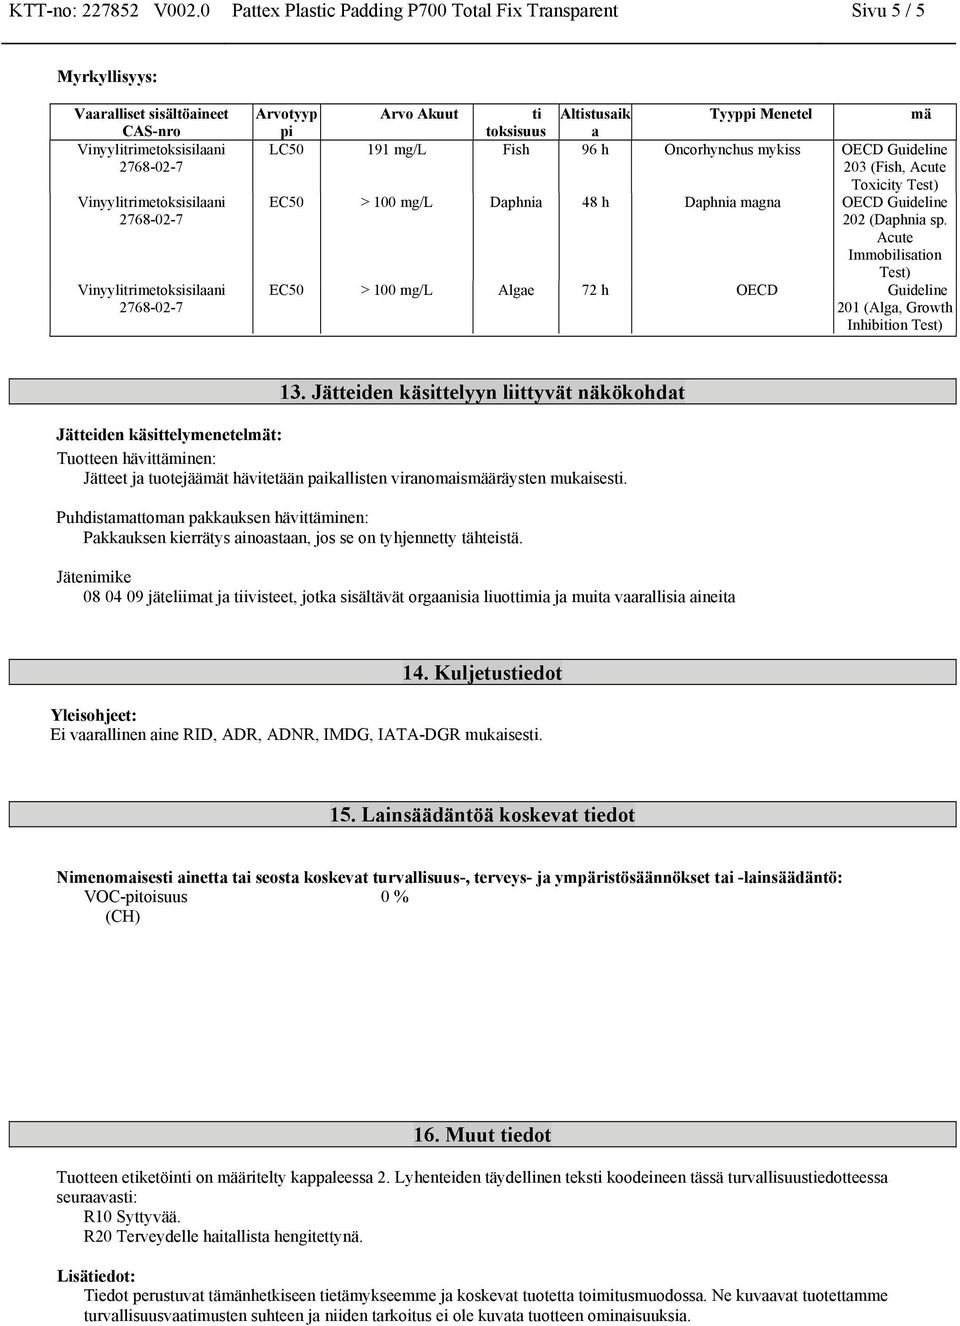 96 h Oncorhynchus mykiss OECD Guideline 203 (Fish, Acute Toxicity Test) EC50 > 100 mg/l Daphnia 48 h Daphnia magna OECD Guideline 202 (Daphnia sp.